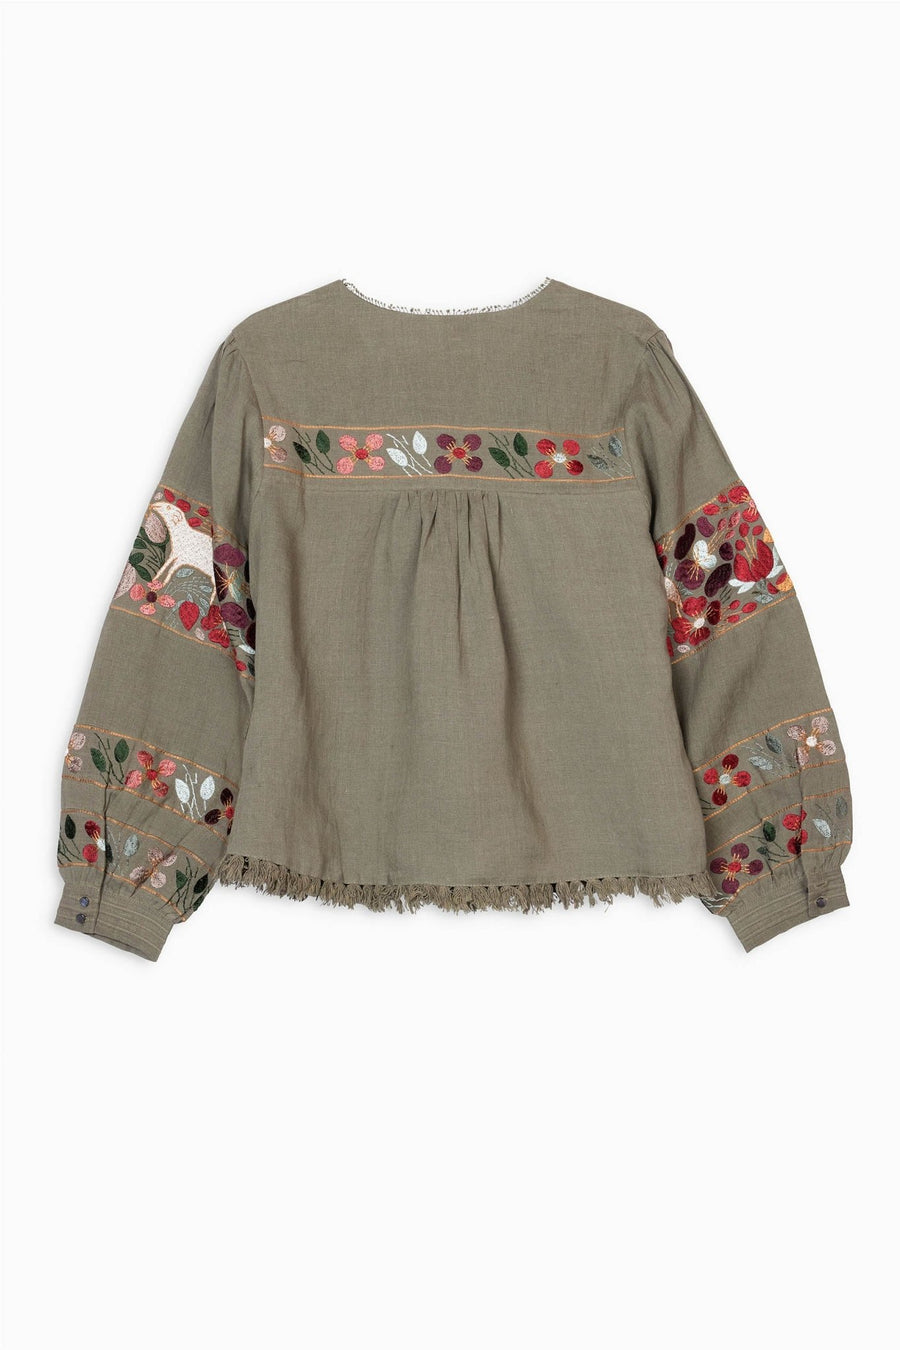 UXMAL LONG SLEEVE EMBROIDERED TOP, ARMY - Burning Torch Online Boutique